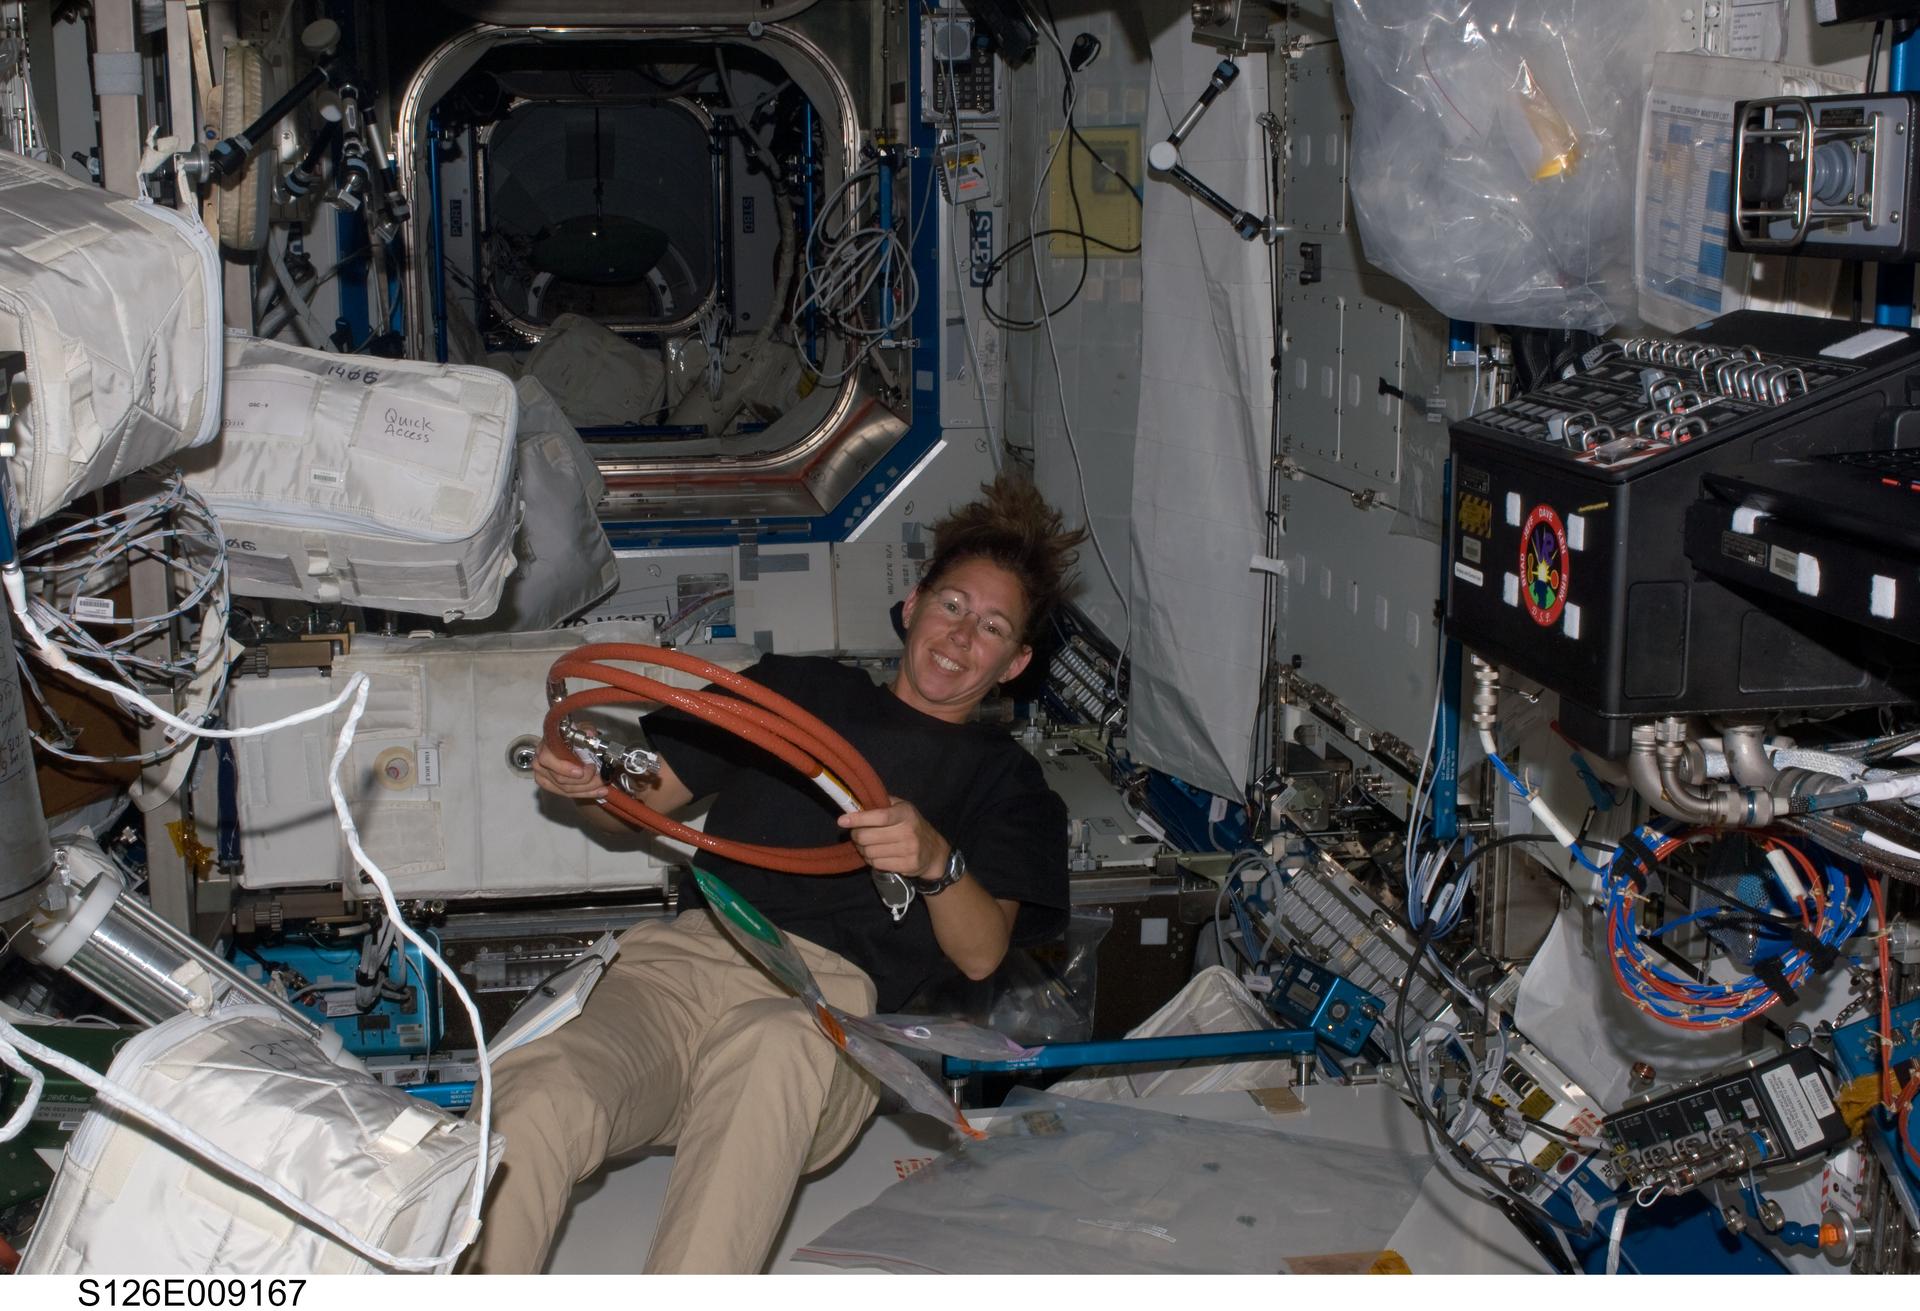 NASA astronaut Sandra Magnus, Expedition 18 flight engineer, works in the Destiny laboratory of the International Space Station in November 2008, while Space Shuttle Endeavour (STS-126) remains docked with the station.